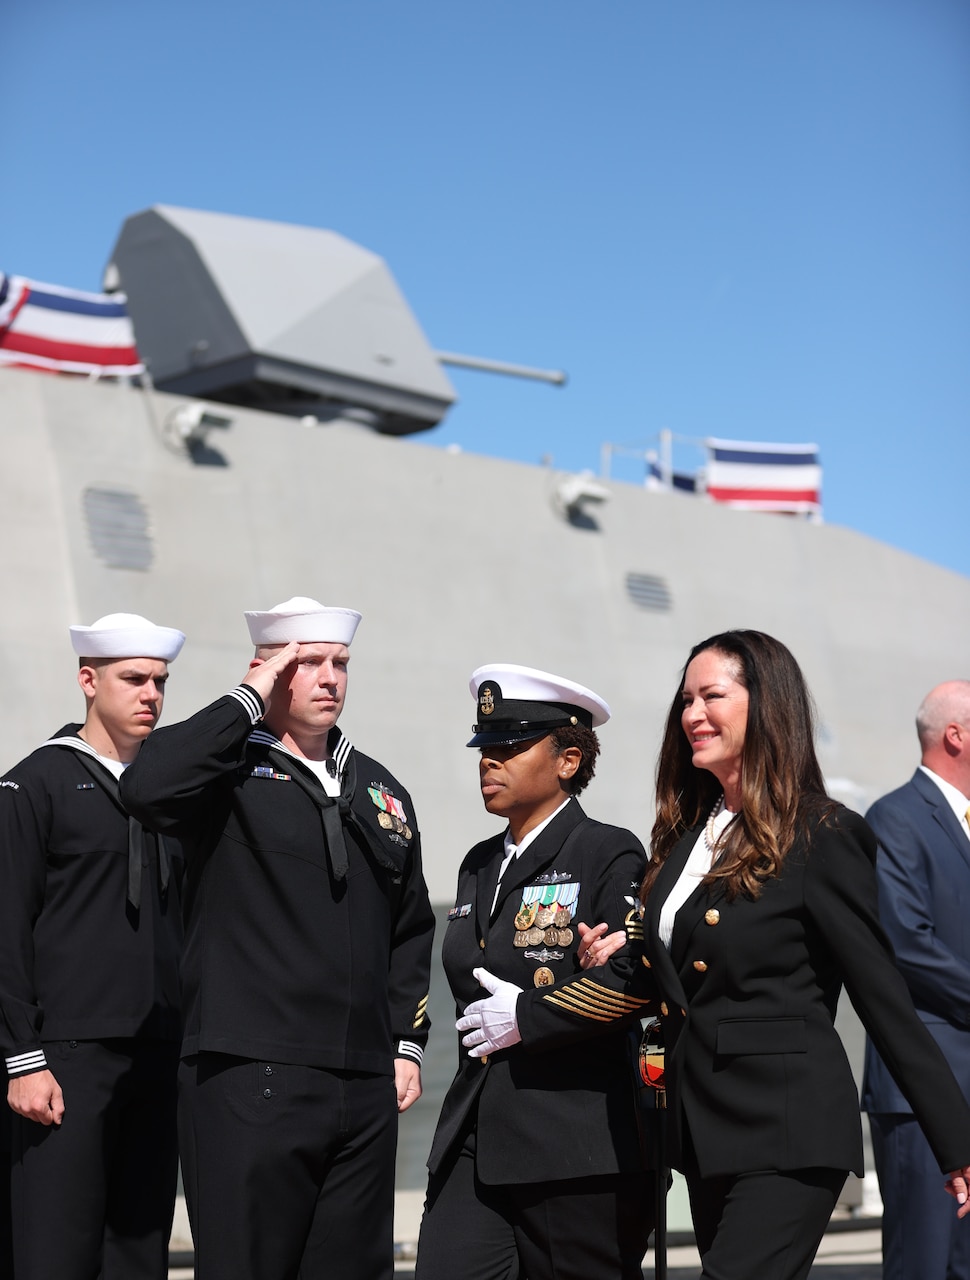 PORT HUENEME, Calif. (Apr 1, 2023) Command Senior Chief Rose Thibodeaux, Independence-class variant littoral combat ship USS Santa Barbara (LCS32), right, escorts the Ship's Sponsor, Lola Zinke during the LCS32 Commissioning Ceremony onboard Naval Base Ventura County (NBVC), Port Hueneme, Apr. 1, 2023. Littoral Combat Ships are fast, optimally-manned, mission-tailored surface combatants that operate in near-shore and open-ocean environments, winning against 21st-century coastal threats. LCS integrate with joint, combined, manned and unmanned teams to support forward presence, maritime security, sea control, and deterrence missions around the globe. NBVC is a strategically located Naval installation composed of three operating facilities: Point Mugu, Port Hueneme and San Nicolas Island. NBVC is the home of the Pacific Seabees, West Coast E-2D Hawkeyes, 3 warfare centers and 80 tenants. (U.S. Navy photo by Mass Communication 1st Class Douglas "Evan" Parker/Released)